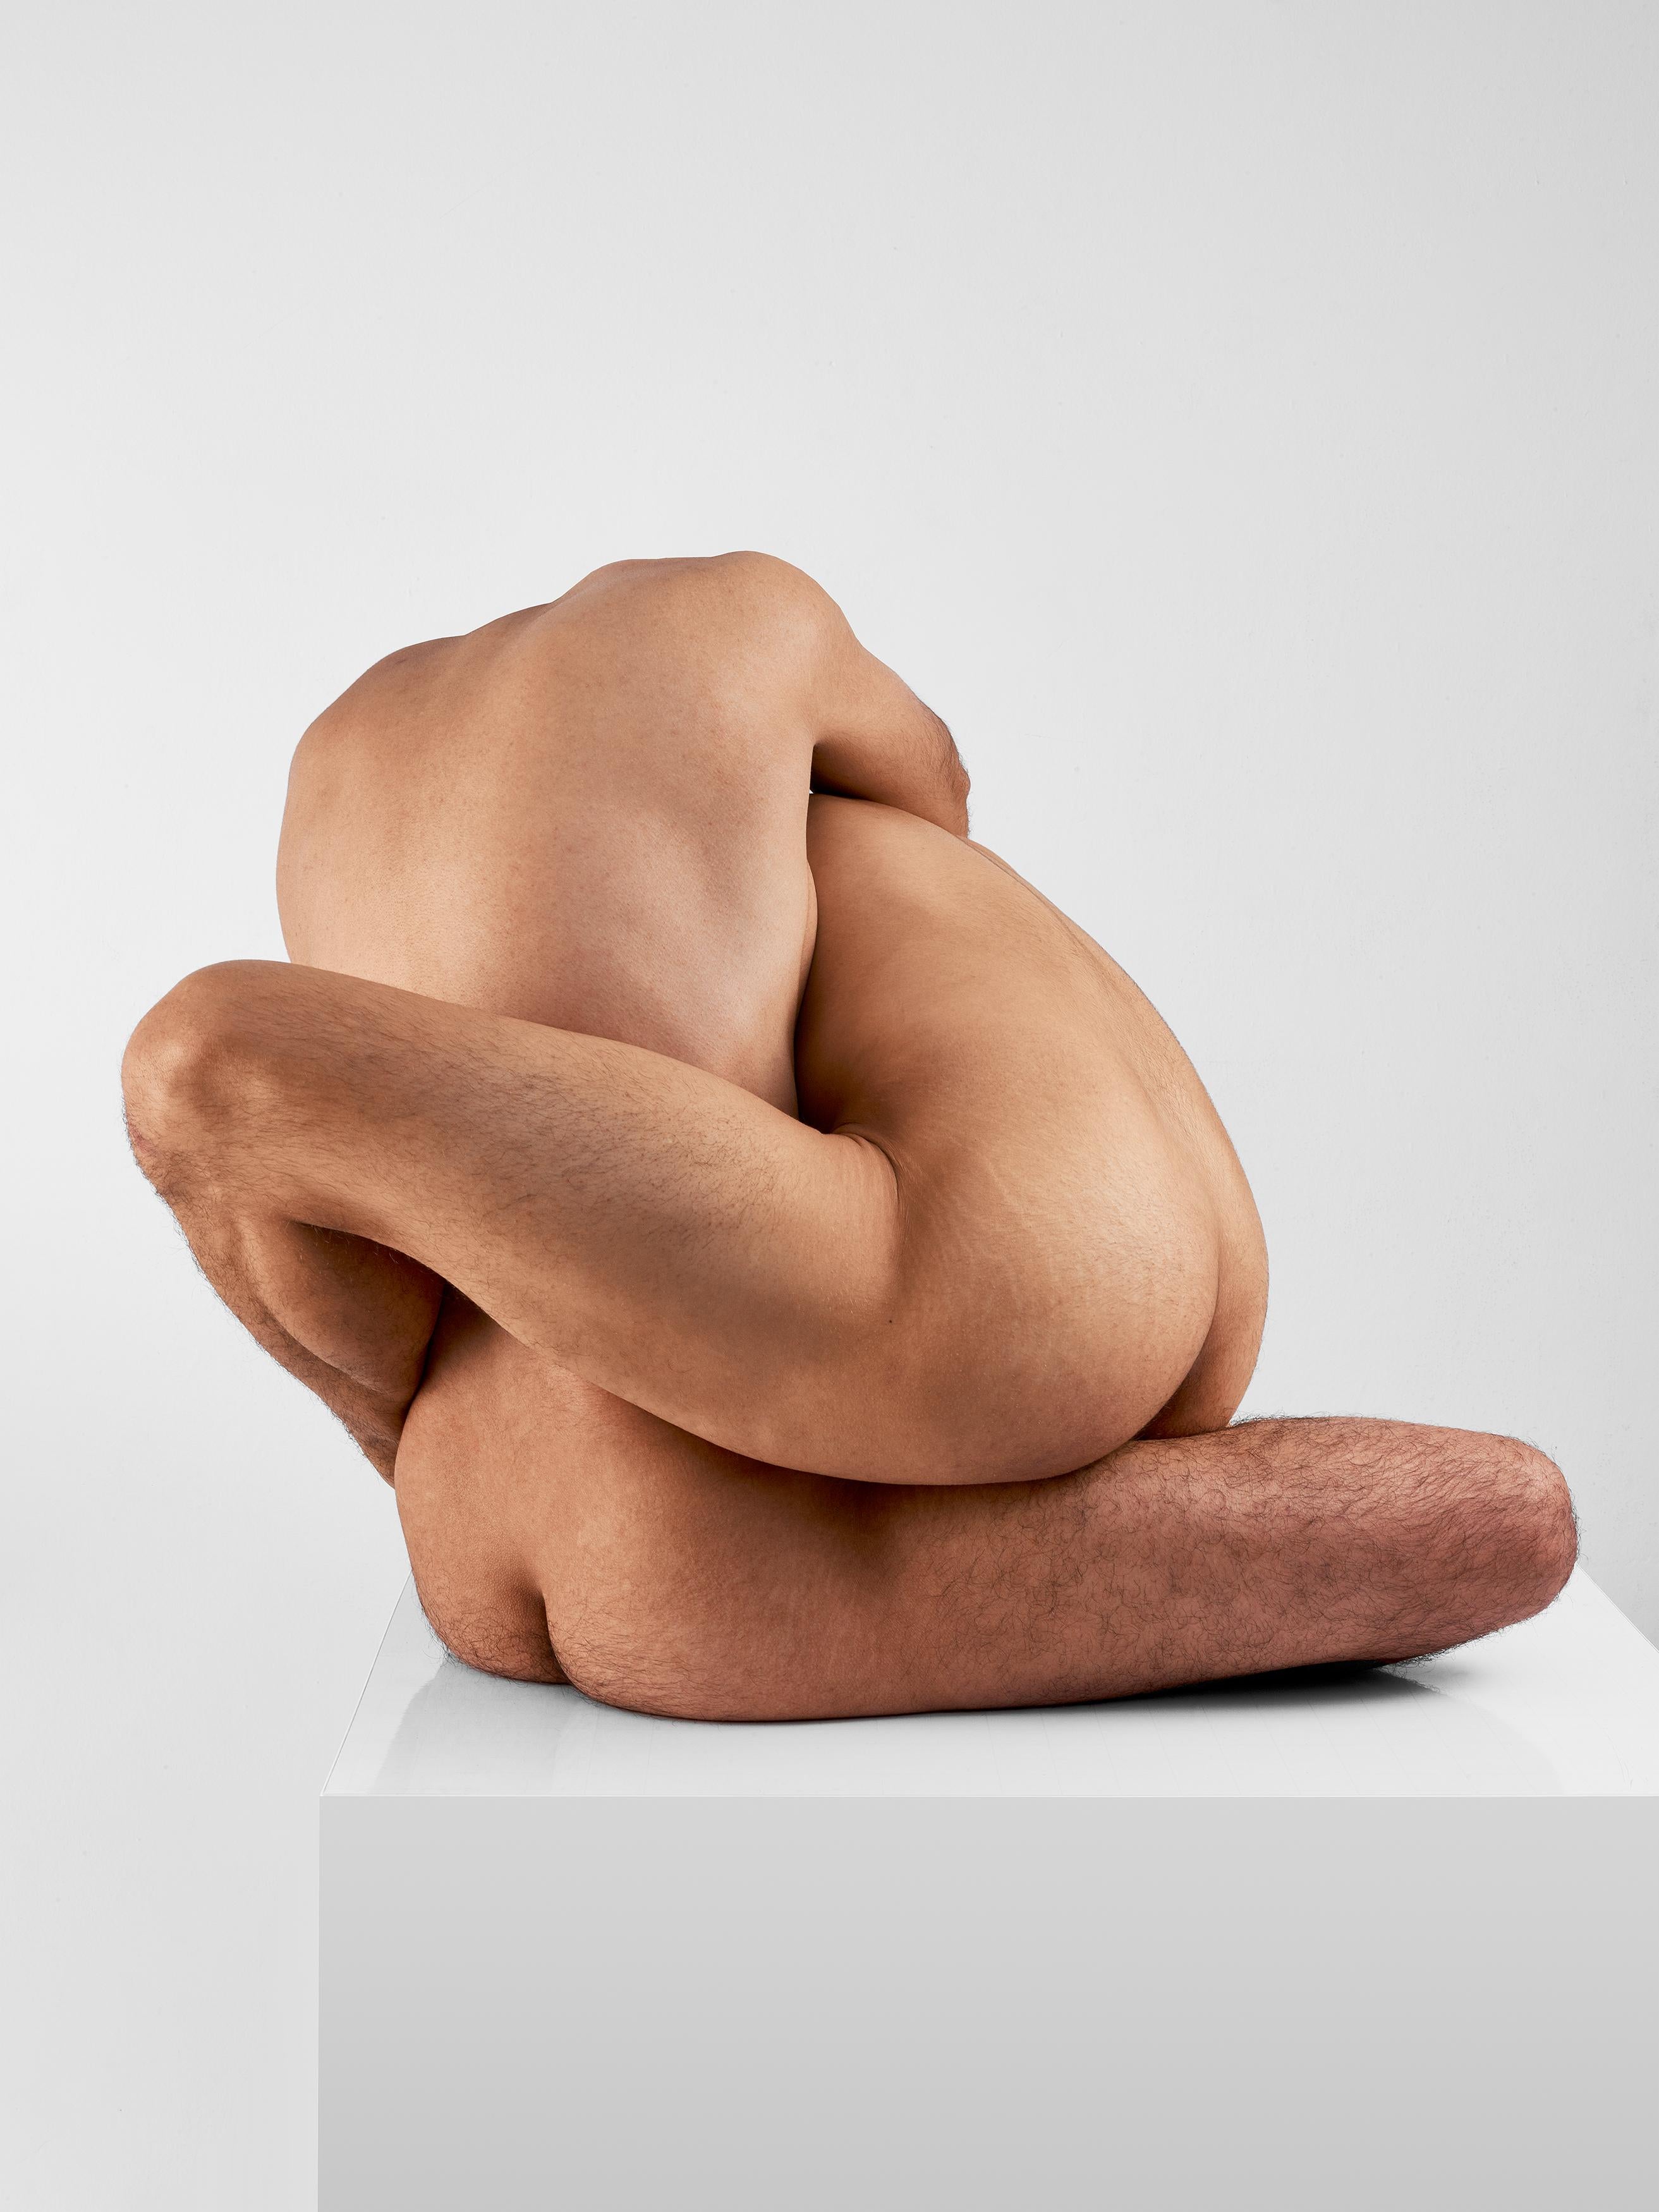 Javier Rey Nude Photograph - Amorphism 77. Color abstract nude photograph 